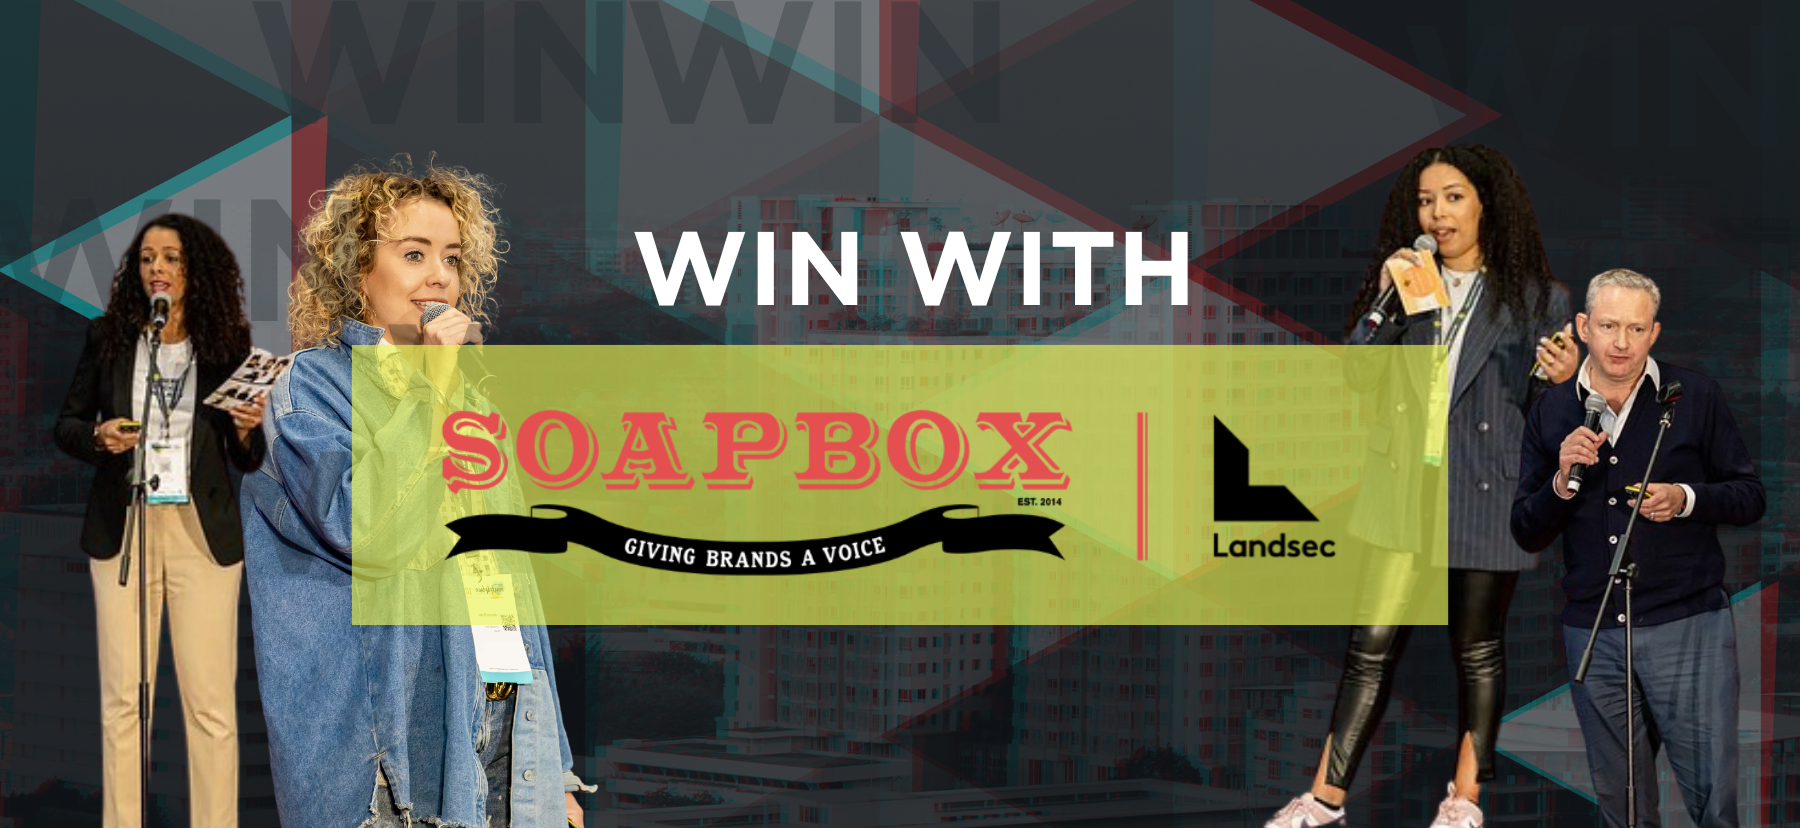 Landsec and the Soapbox offer ‘up & coming’ brands the competition of a lifetime!